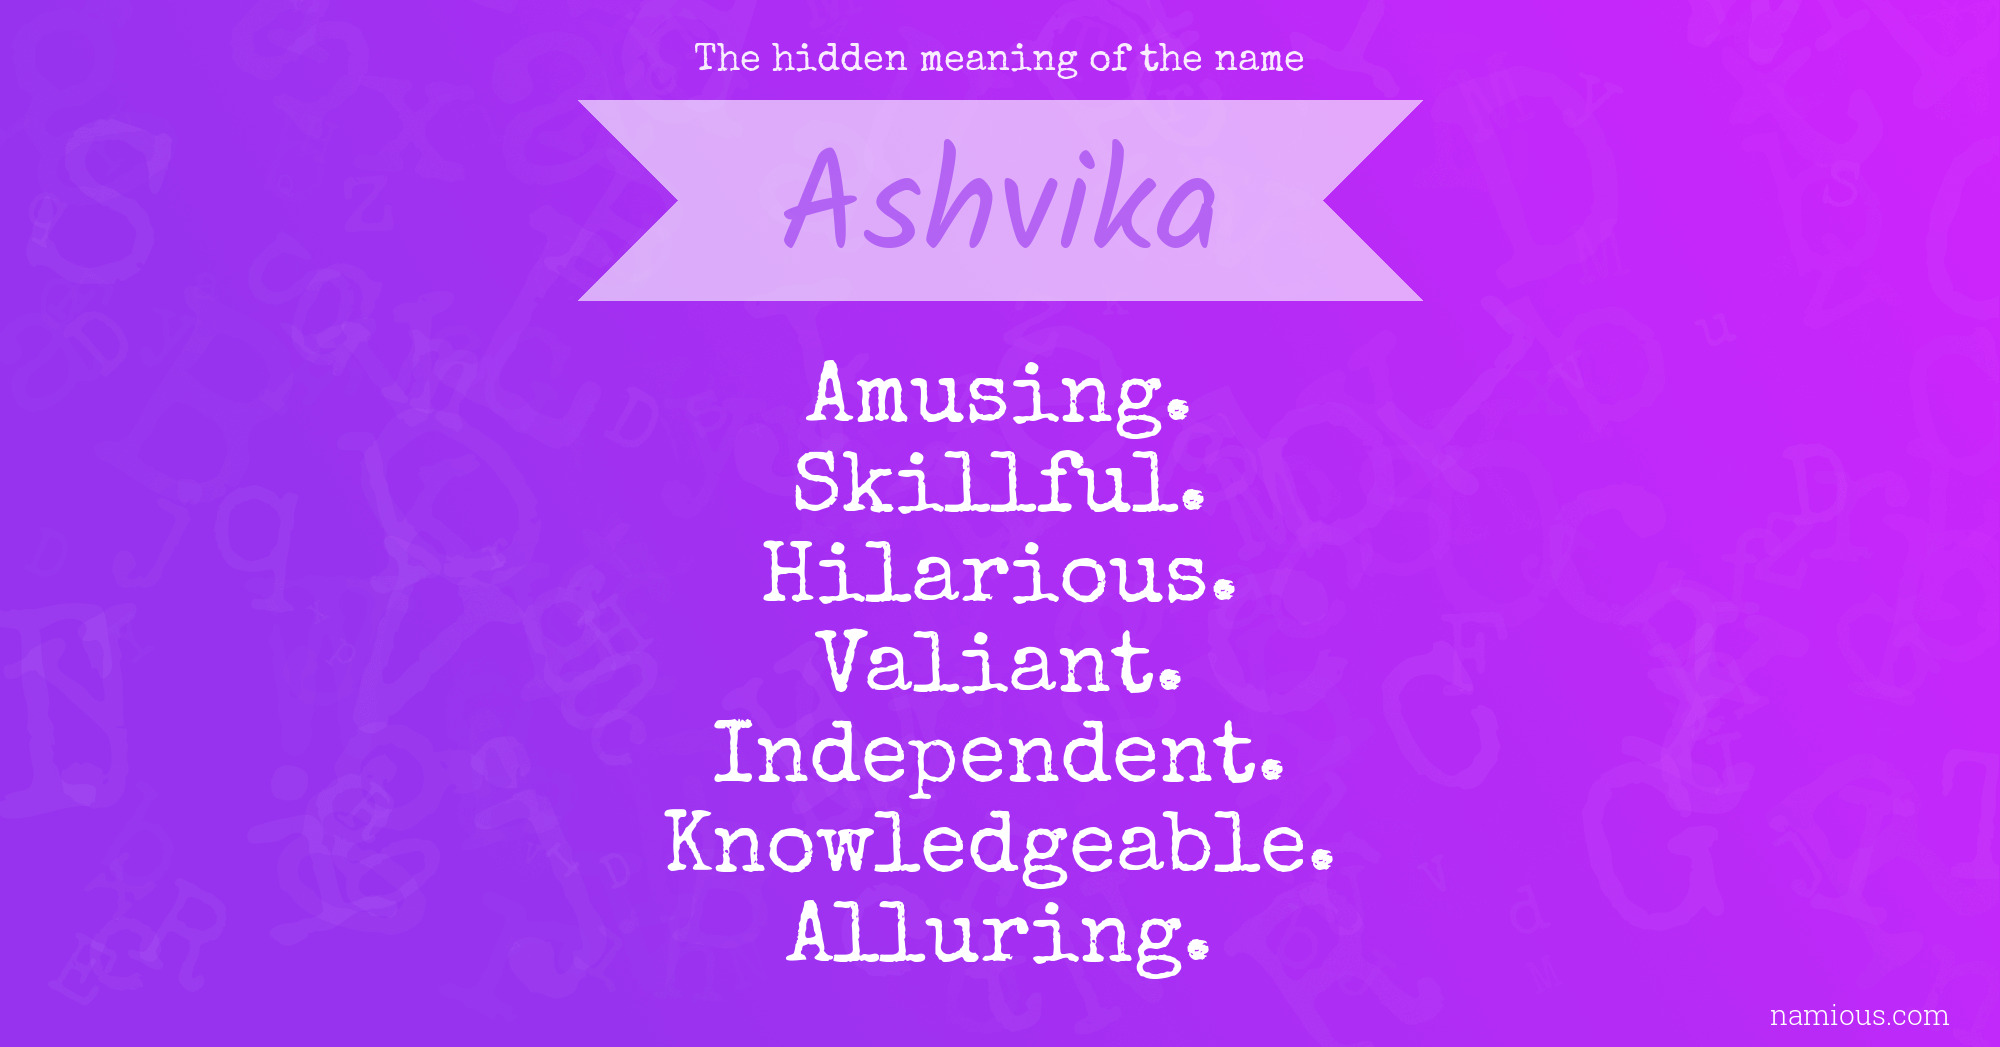 The hidden meaning of the name Ashvika